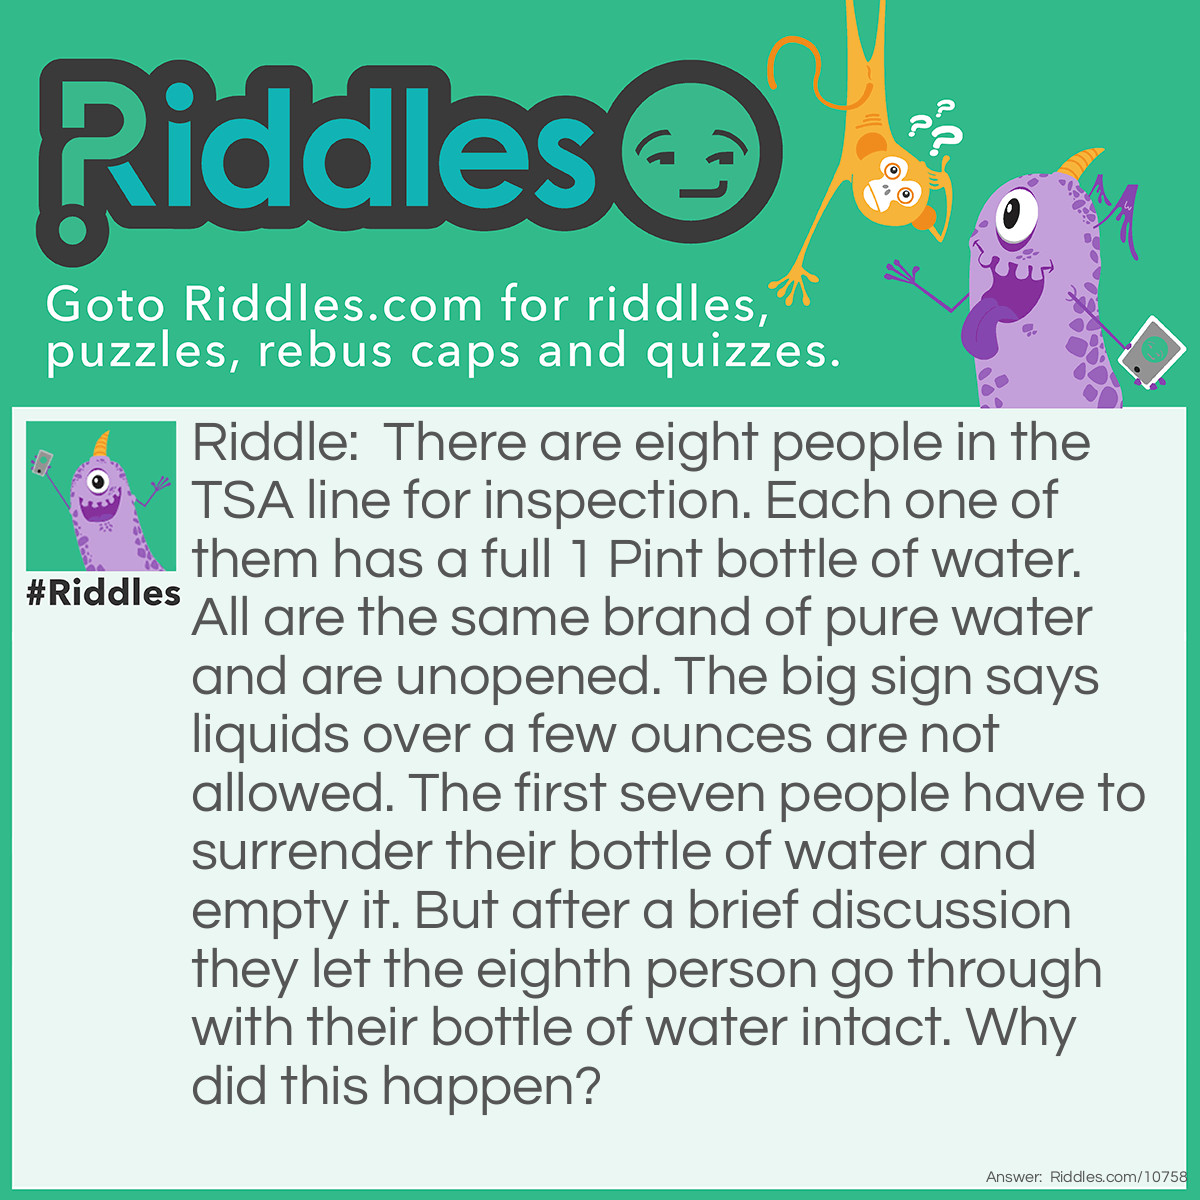 Riddle: There are eight people in the TSA line for inspection. Each one of them has a full 1 Pint bottle of water. All are the same brand of pure water and are unopened. The big sign says liquids over a few ounces are not allowed. The first seven people have to surrender their bottle of water and empty it. But after a brief discussion they let the eighth person go through with their bottle of water intact. Why did this happen? Answer: The eighth bottle was frozen. The TSA permits completely frozen liquids to pass through.